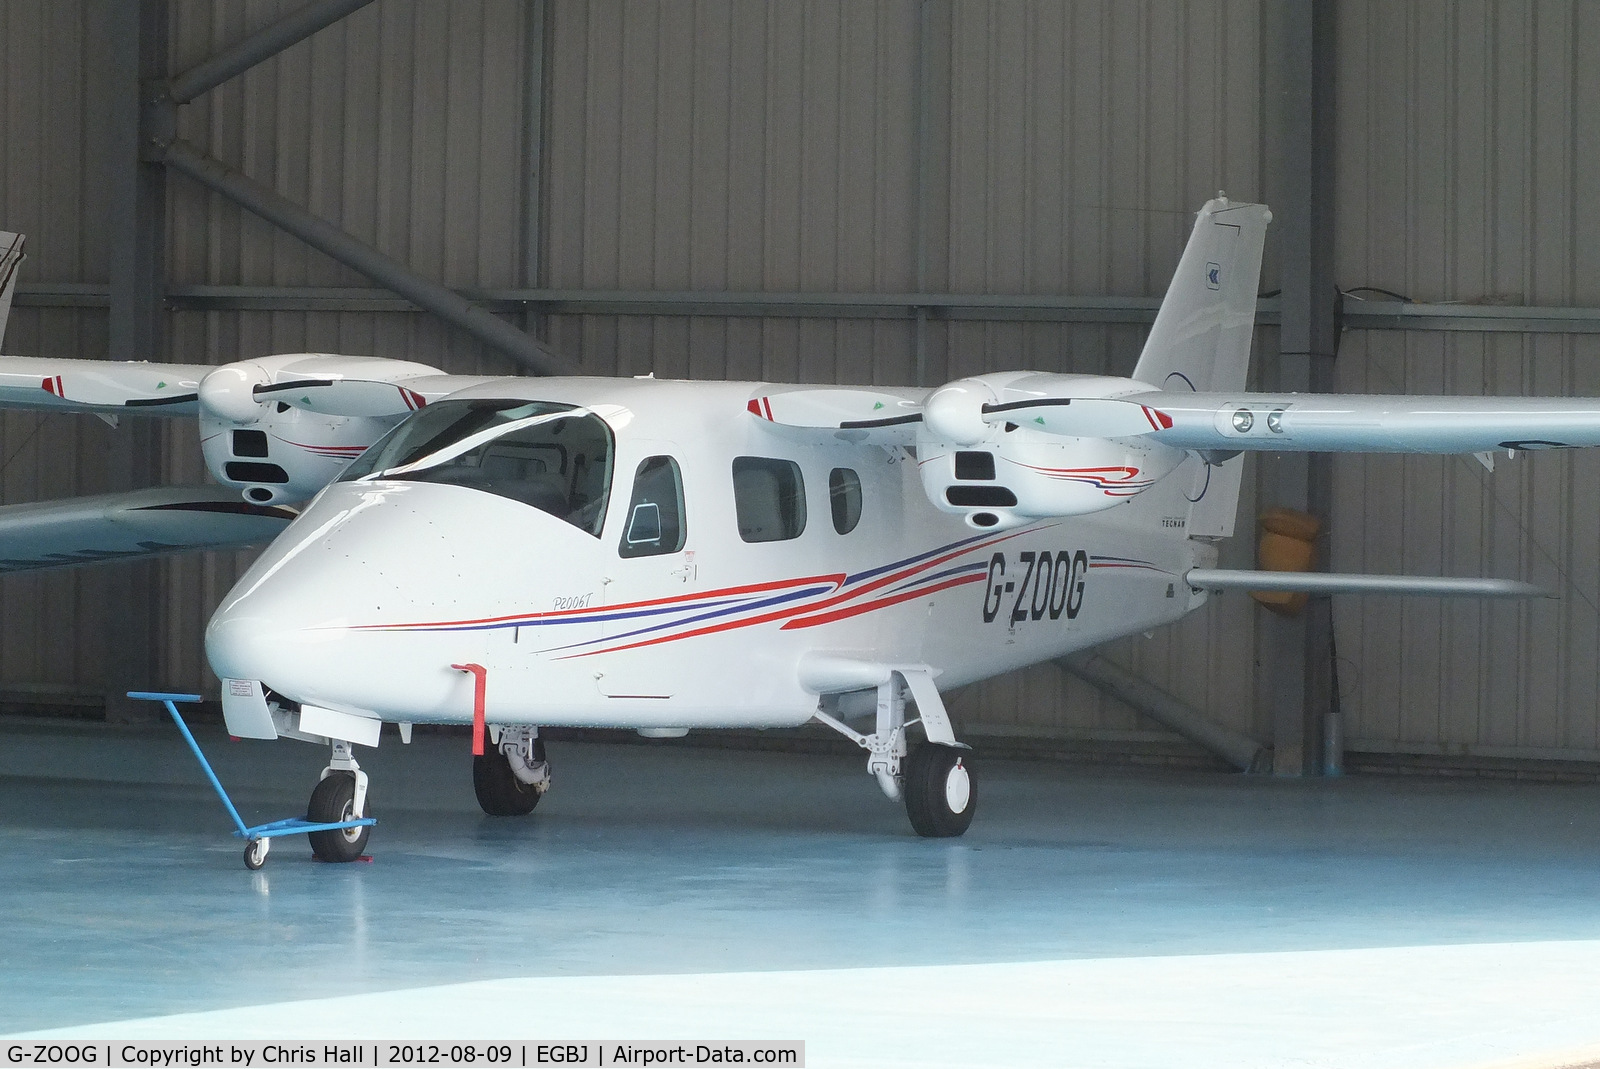 G-ZOOG, 2010 Tecnam P-2006T C/N 049, previously operated by the Airways Flying Club.